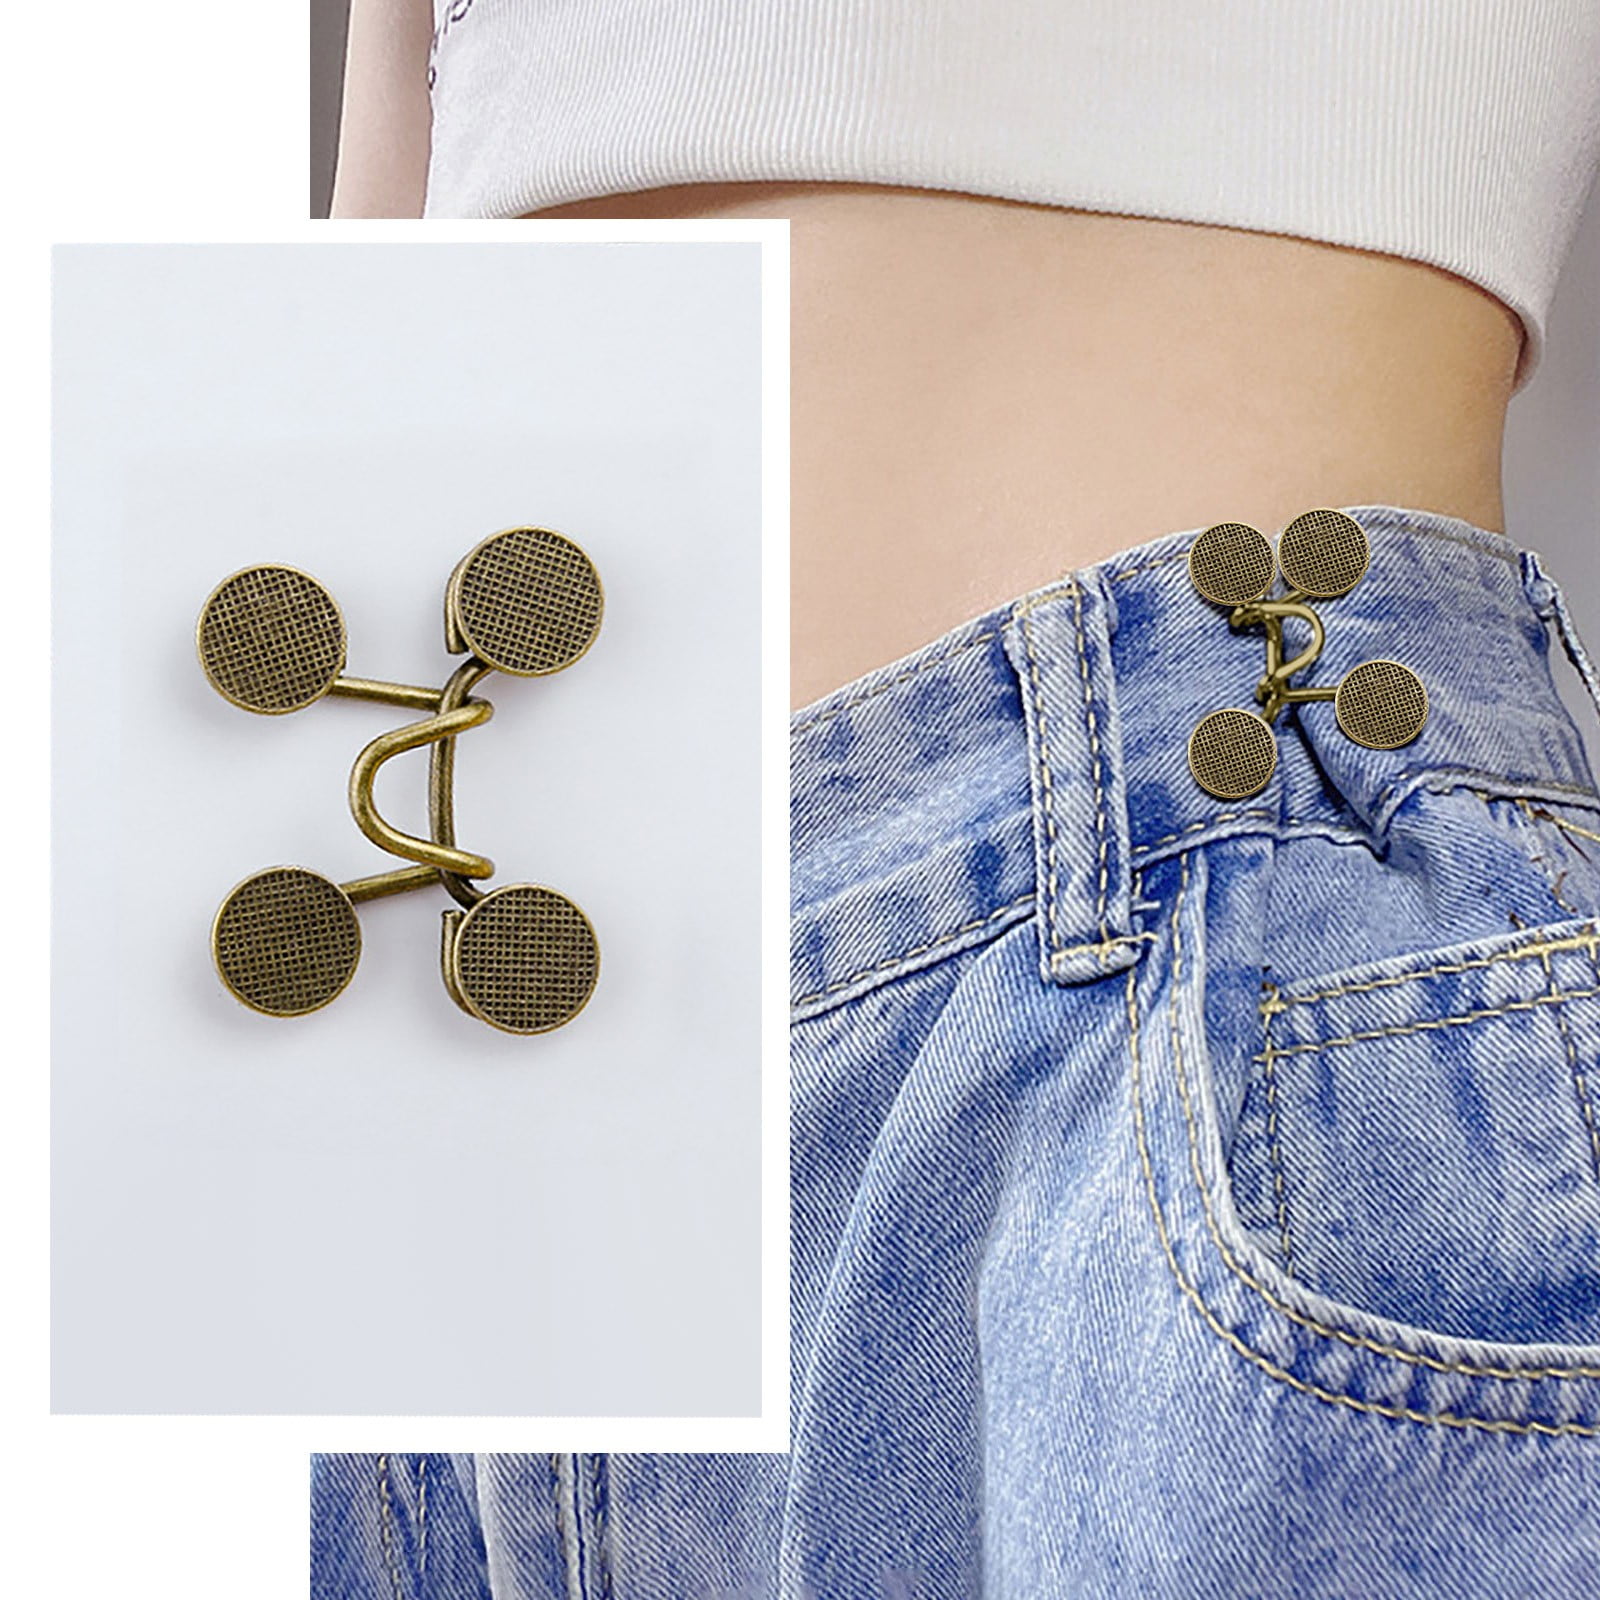 1PCS Metal Button Extender for Pants Jeans Free Sewing Adjustable